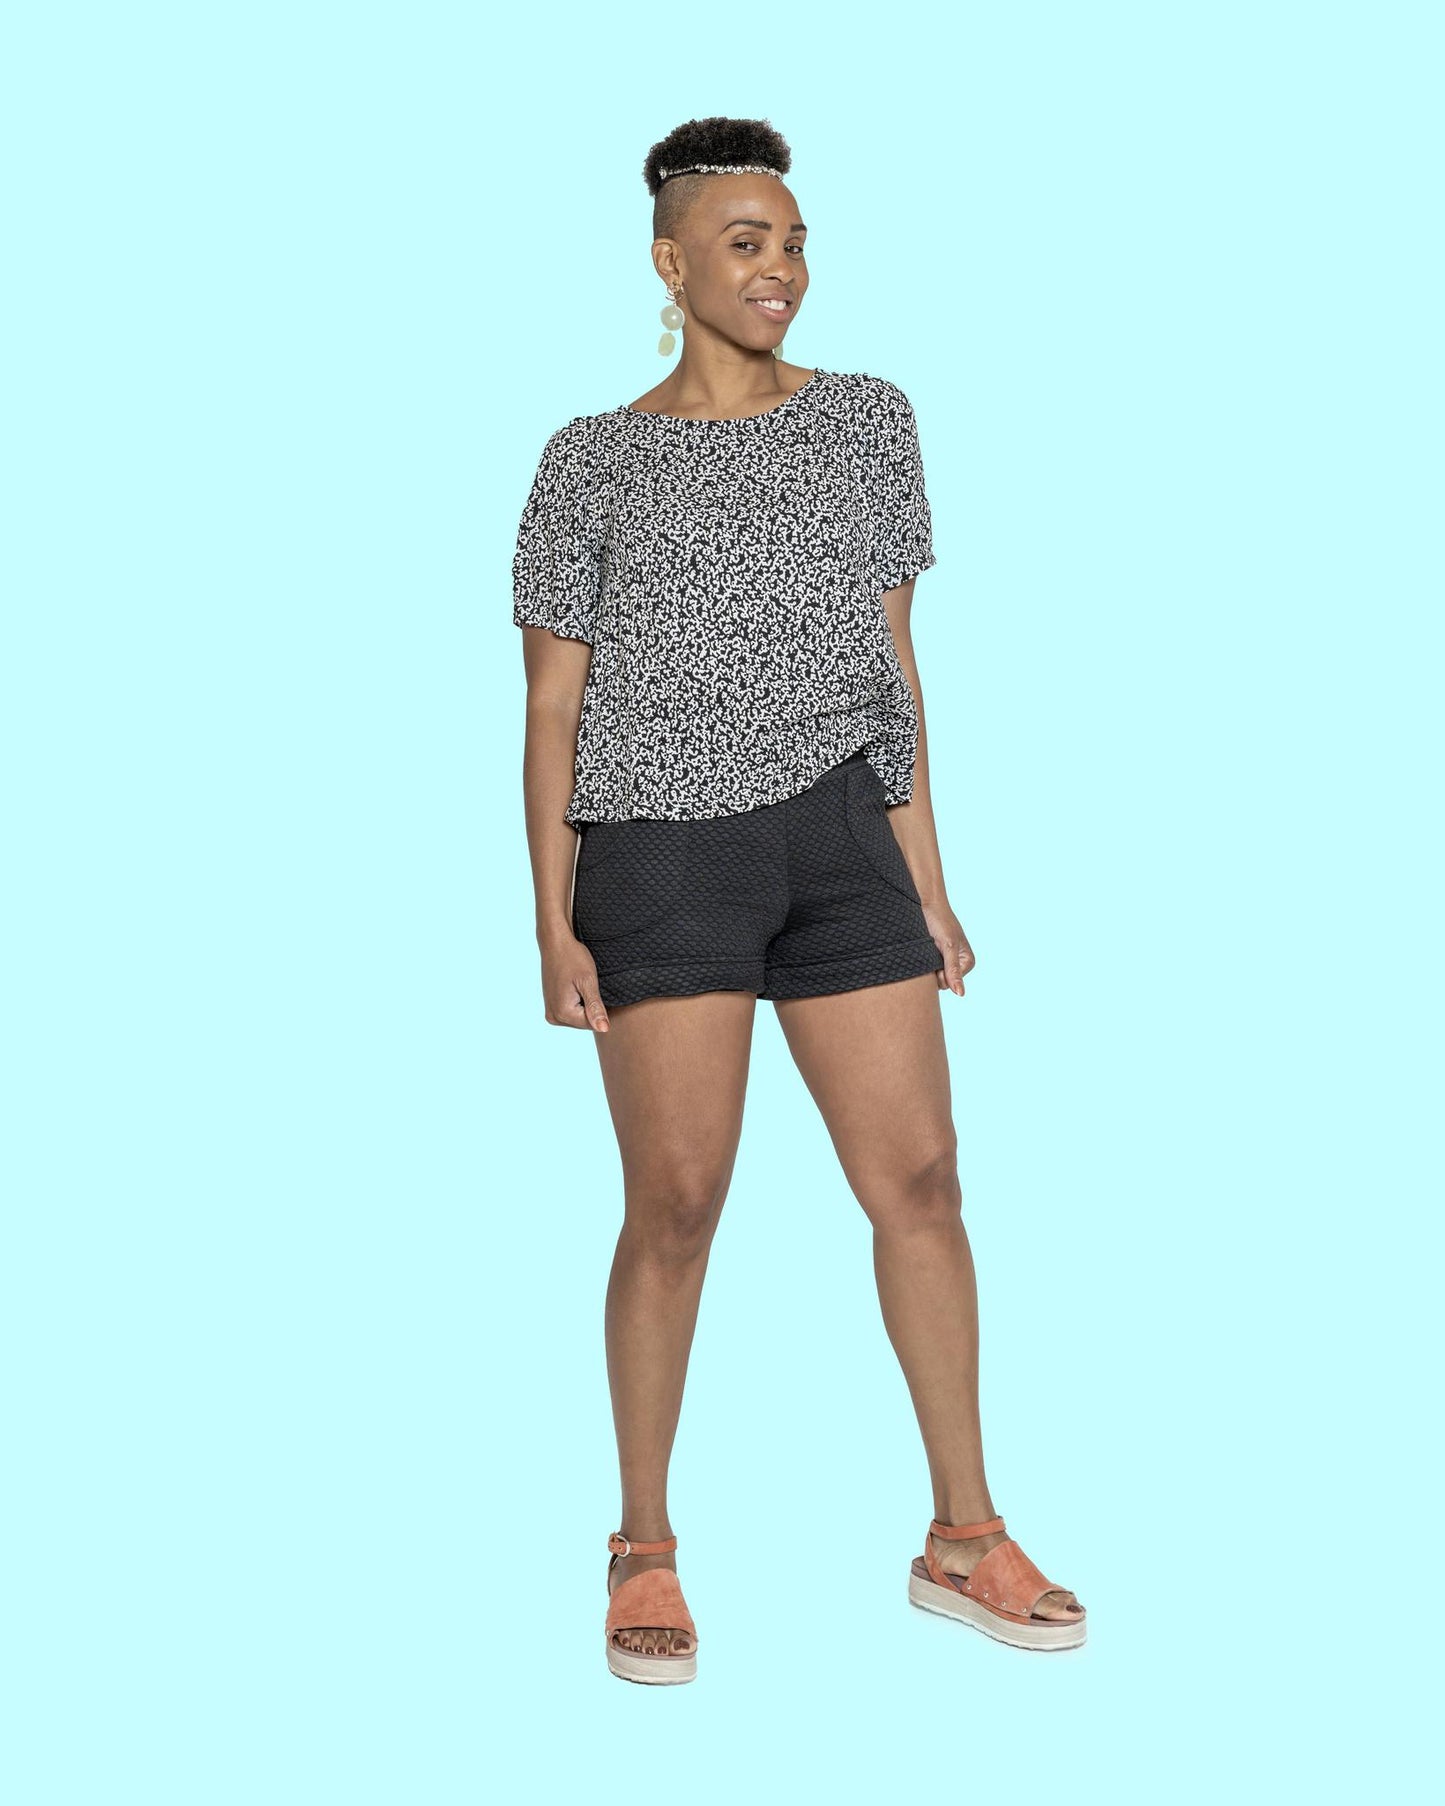 Squasht Short Shorts in Black with Textured Dots